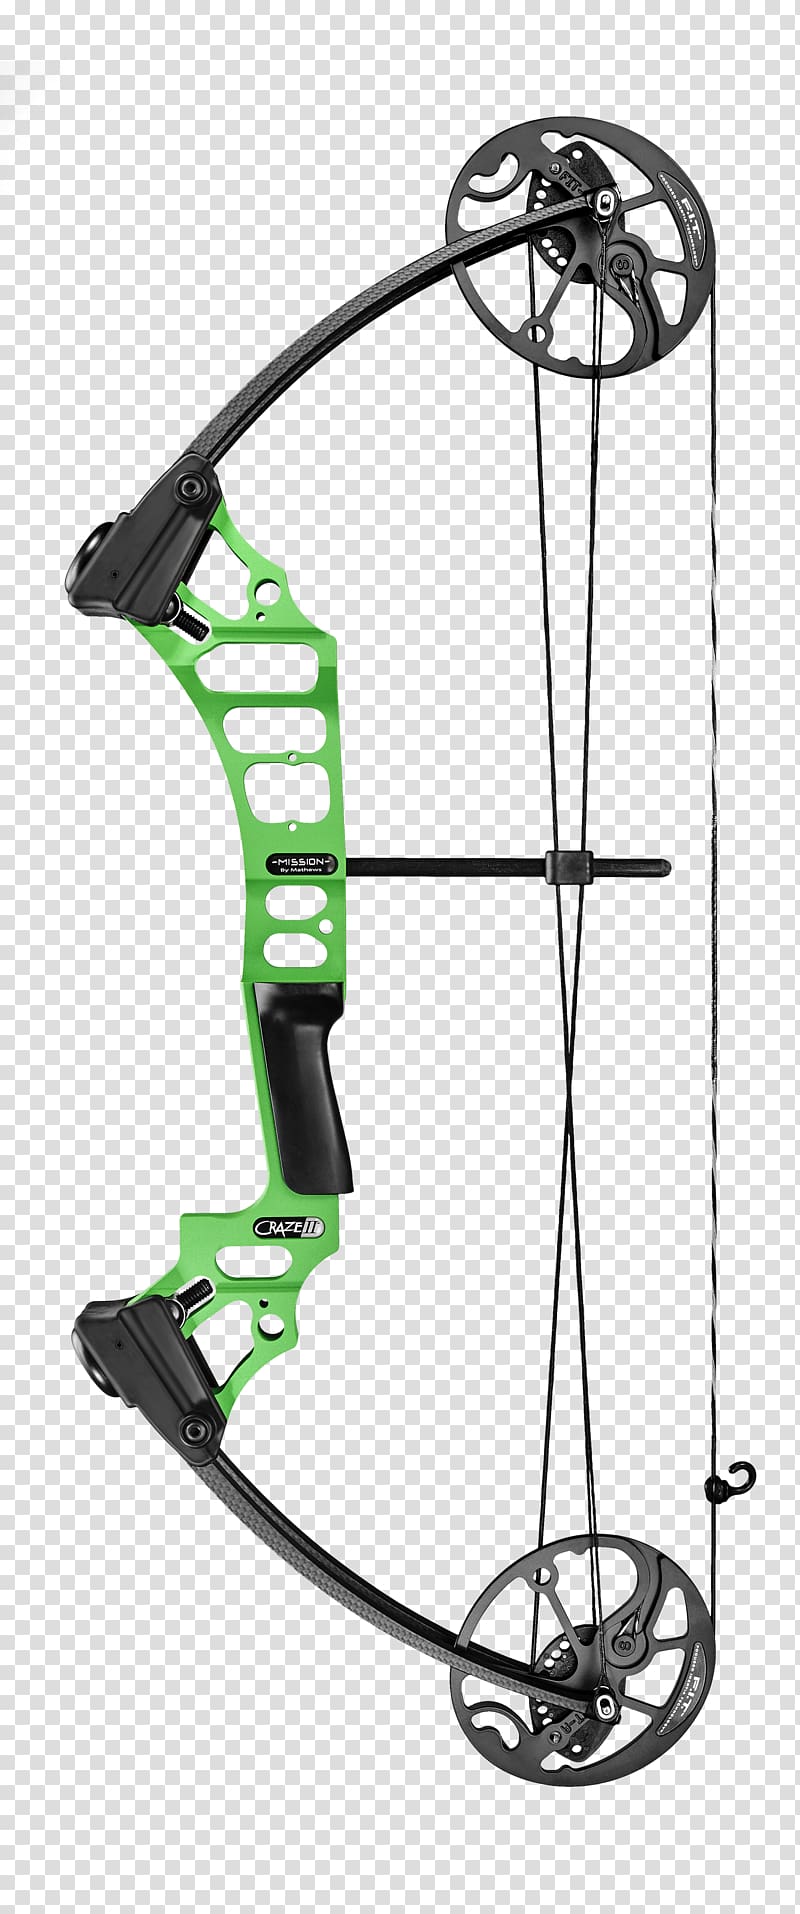 Compound Bows Bow and arrow PSE Archery Bowhunting, archery transparent background PNG clipart